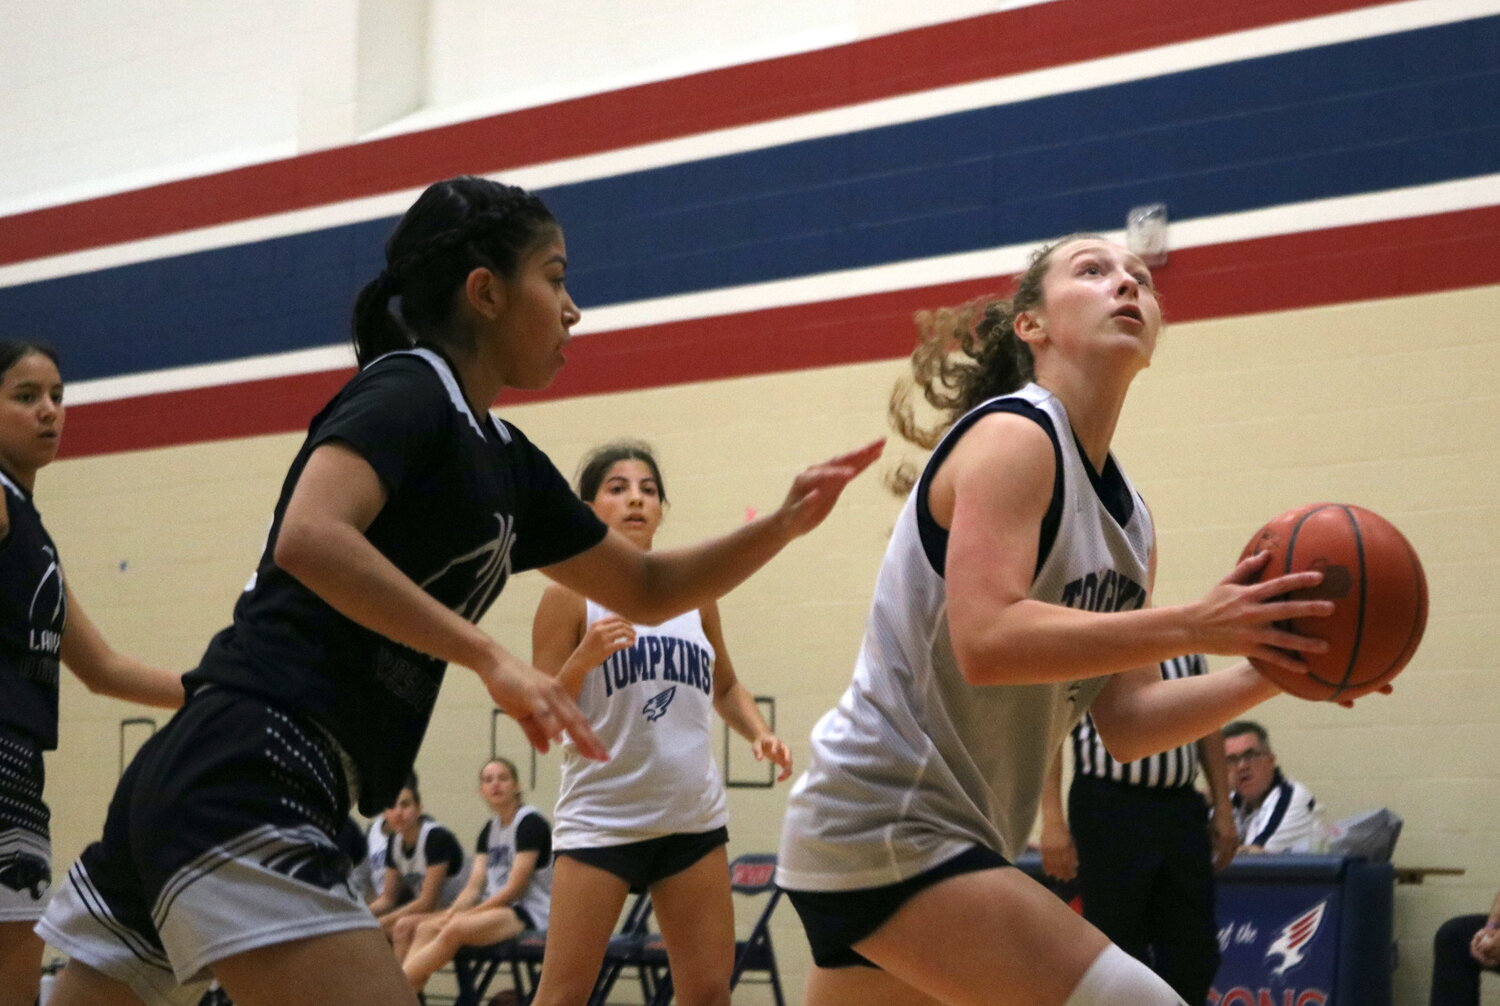 Gabby Painter makes a move in the paint during Thursday's game between Tompkins and Laredo United South defenders at the Tompkins gym.